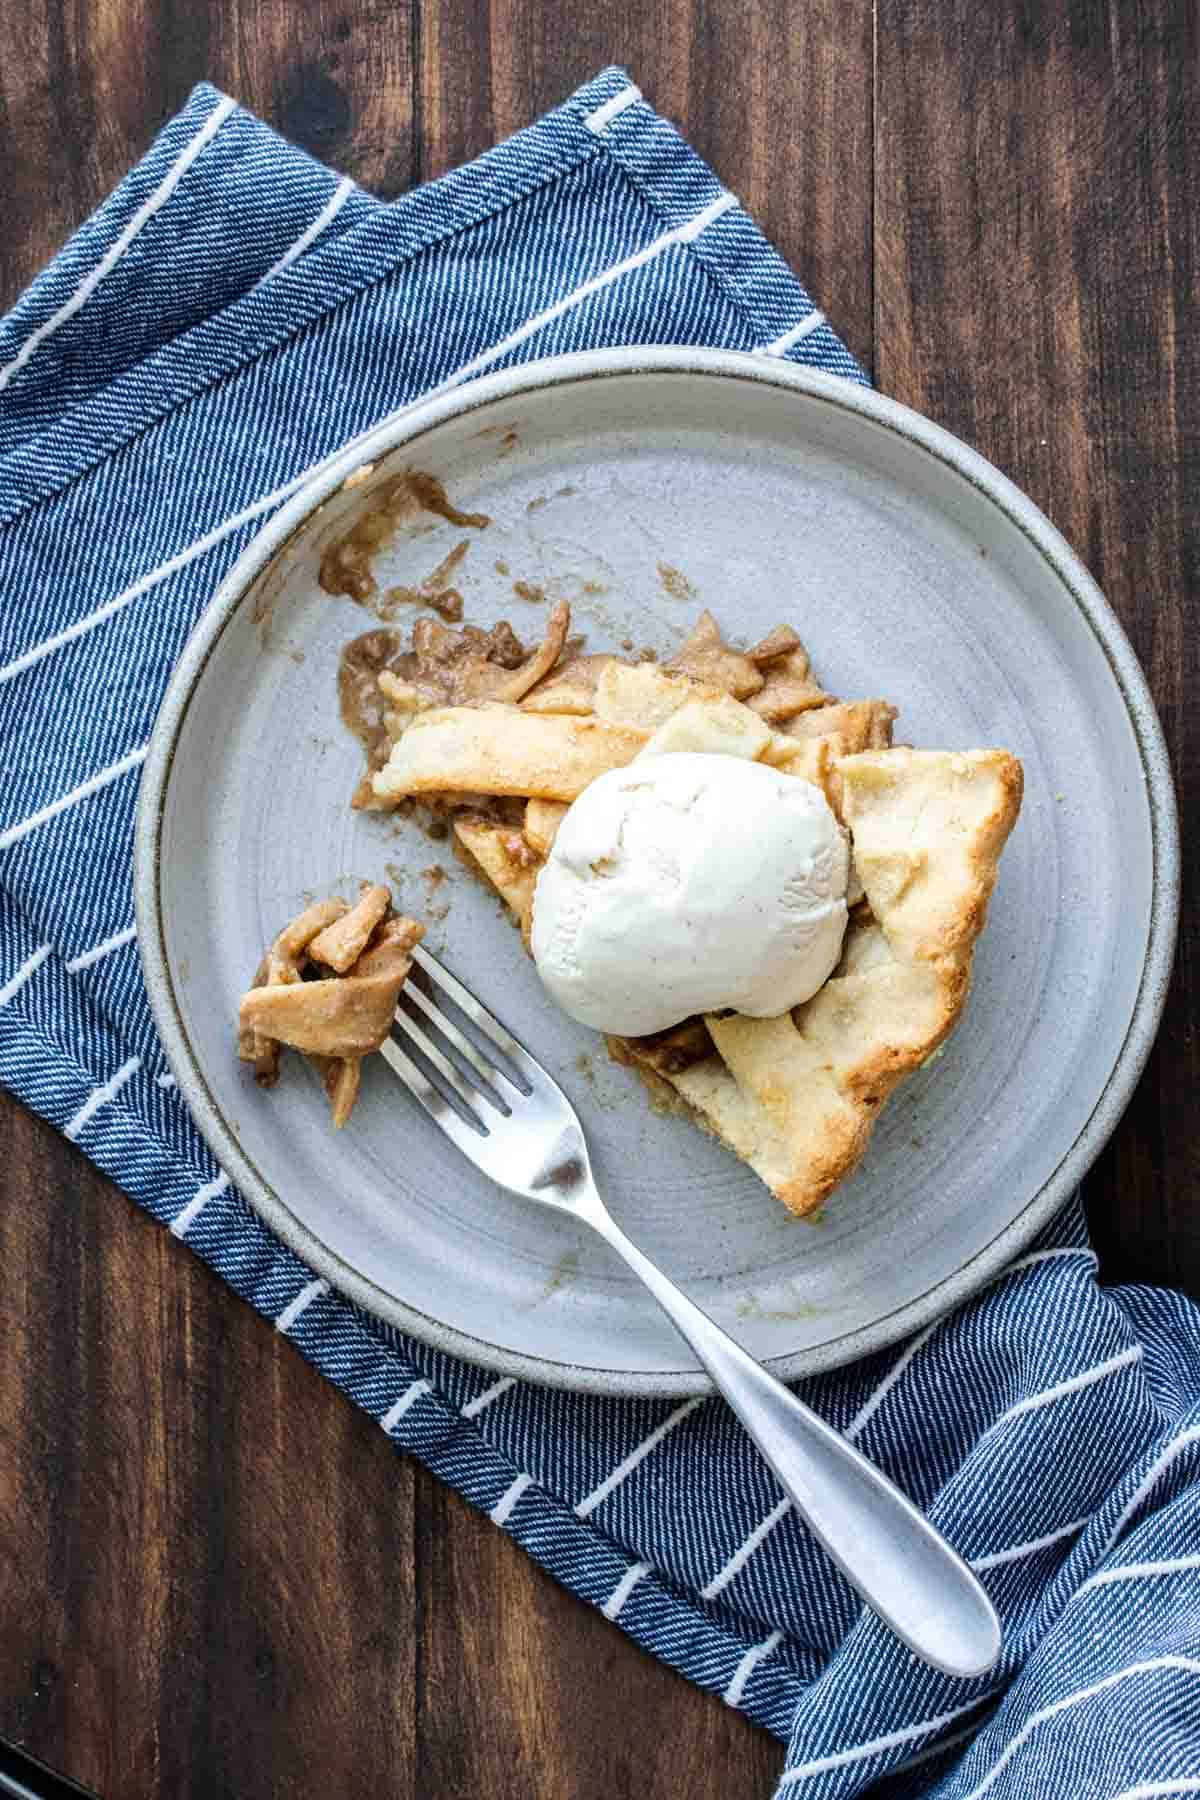 Top view of a fork eating a piece of apple pie topped with ice cream